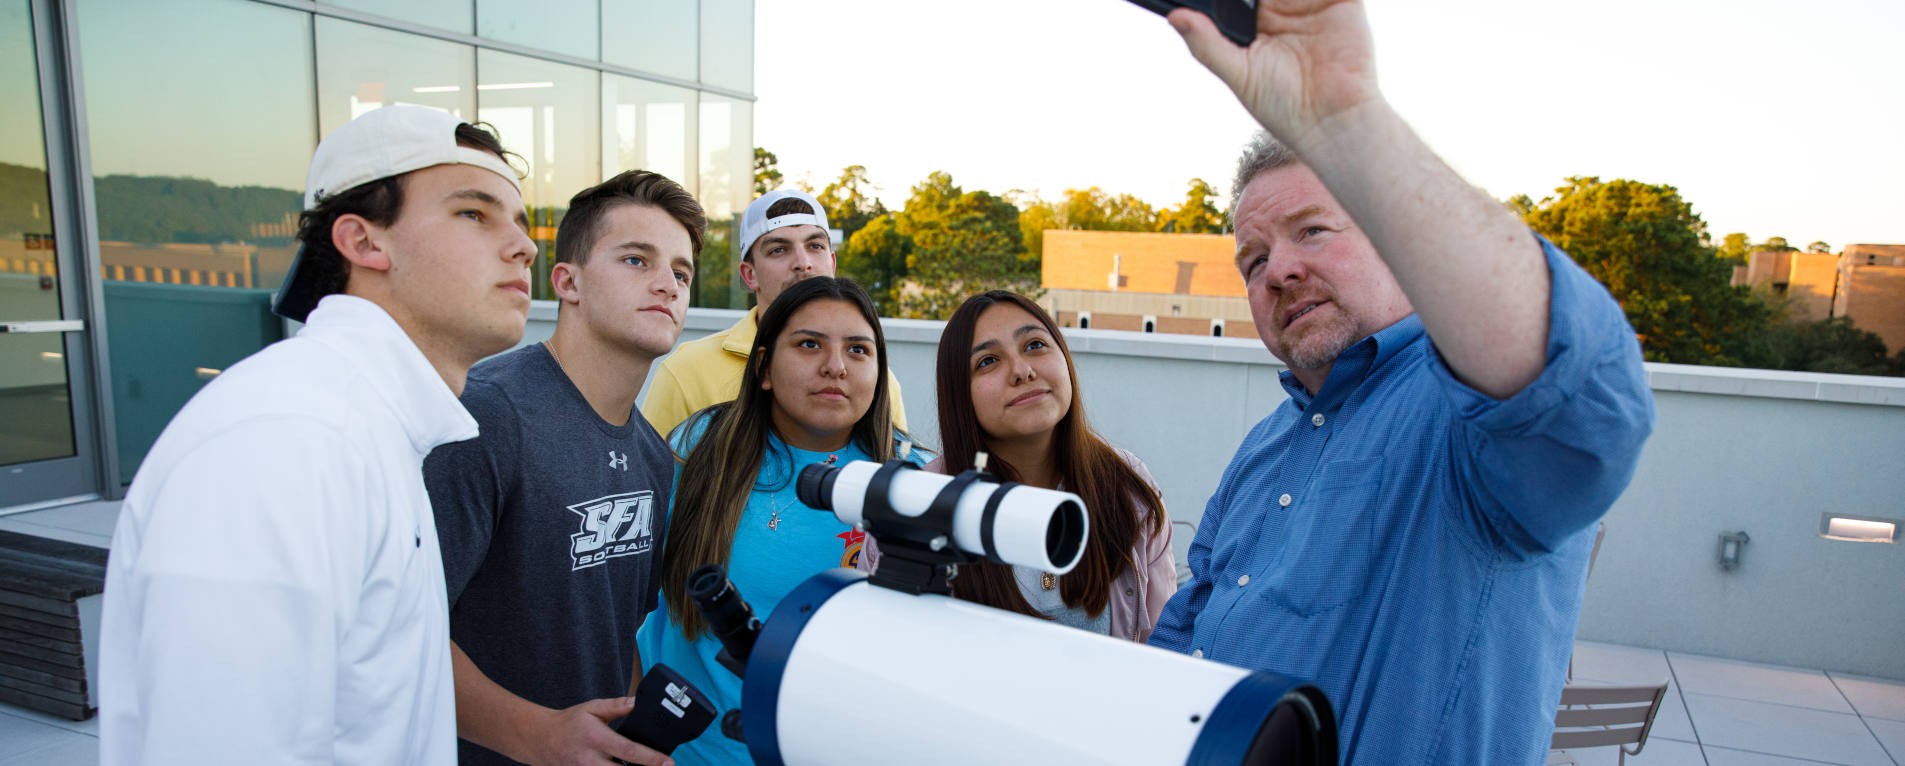 Dr. Dan Bruton demonstrates to a group of students how to use astronomy equipment